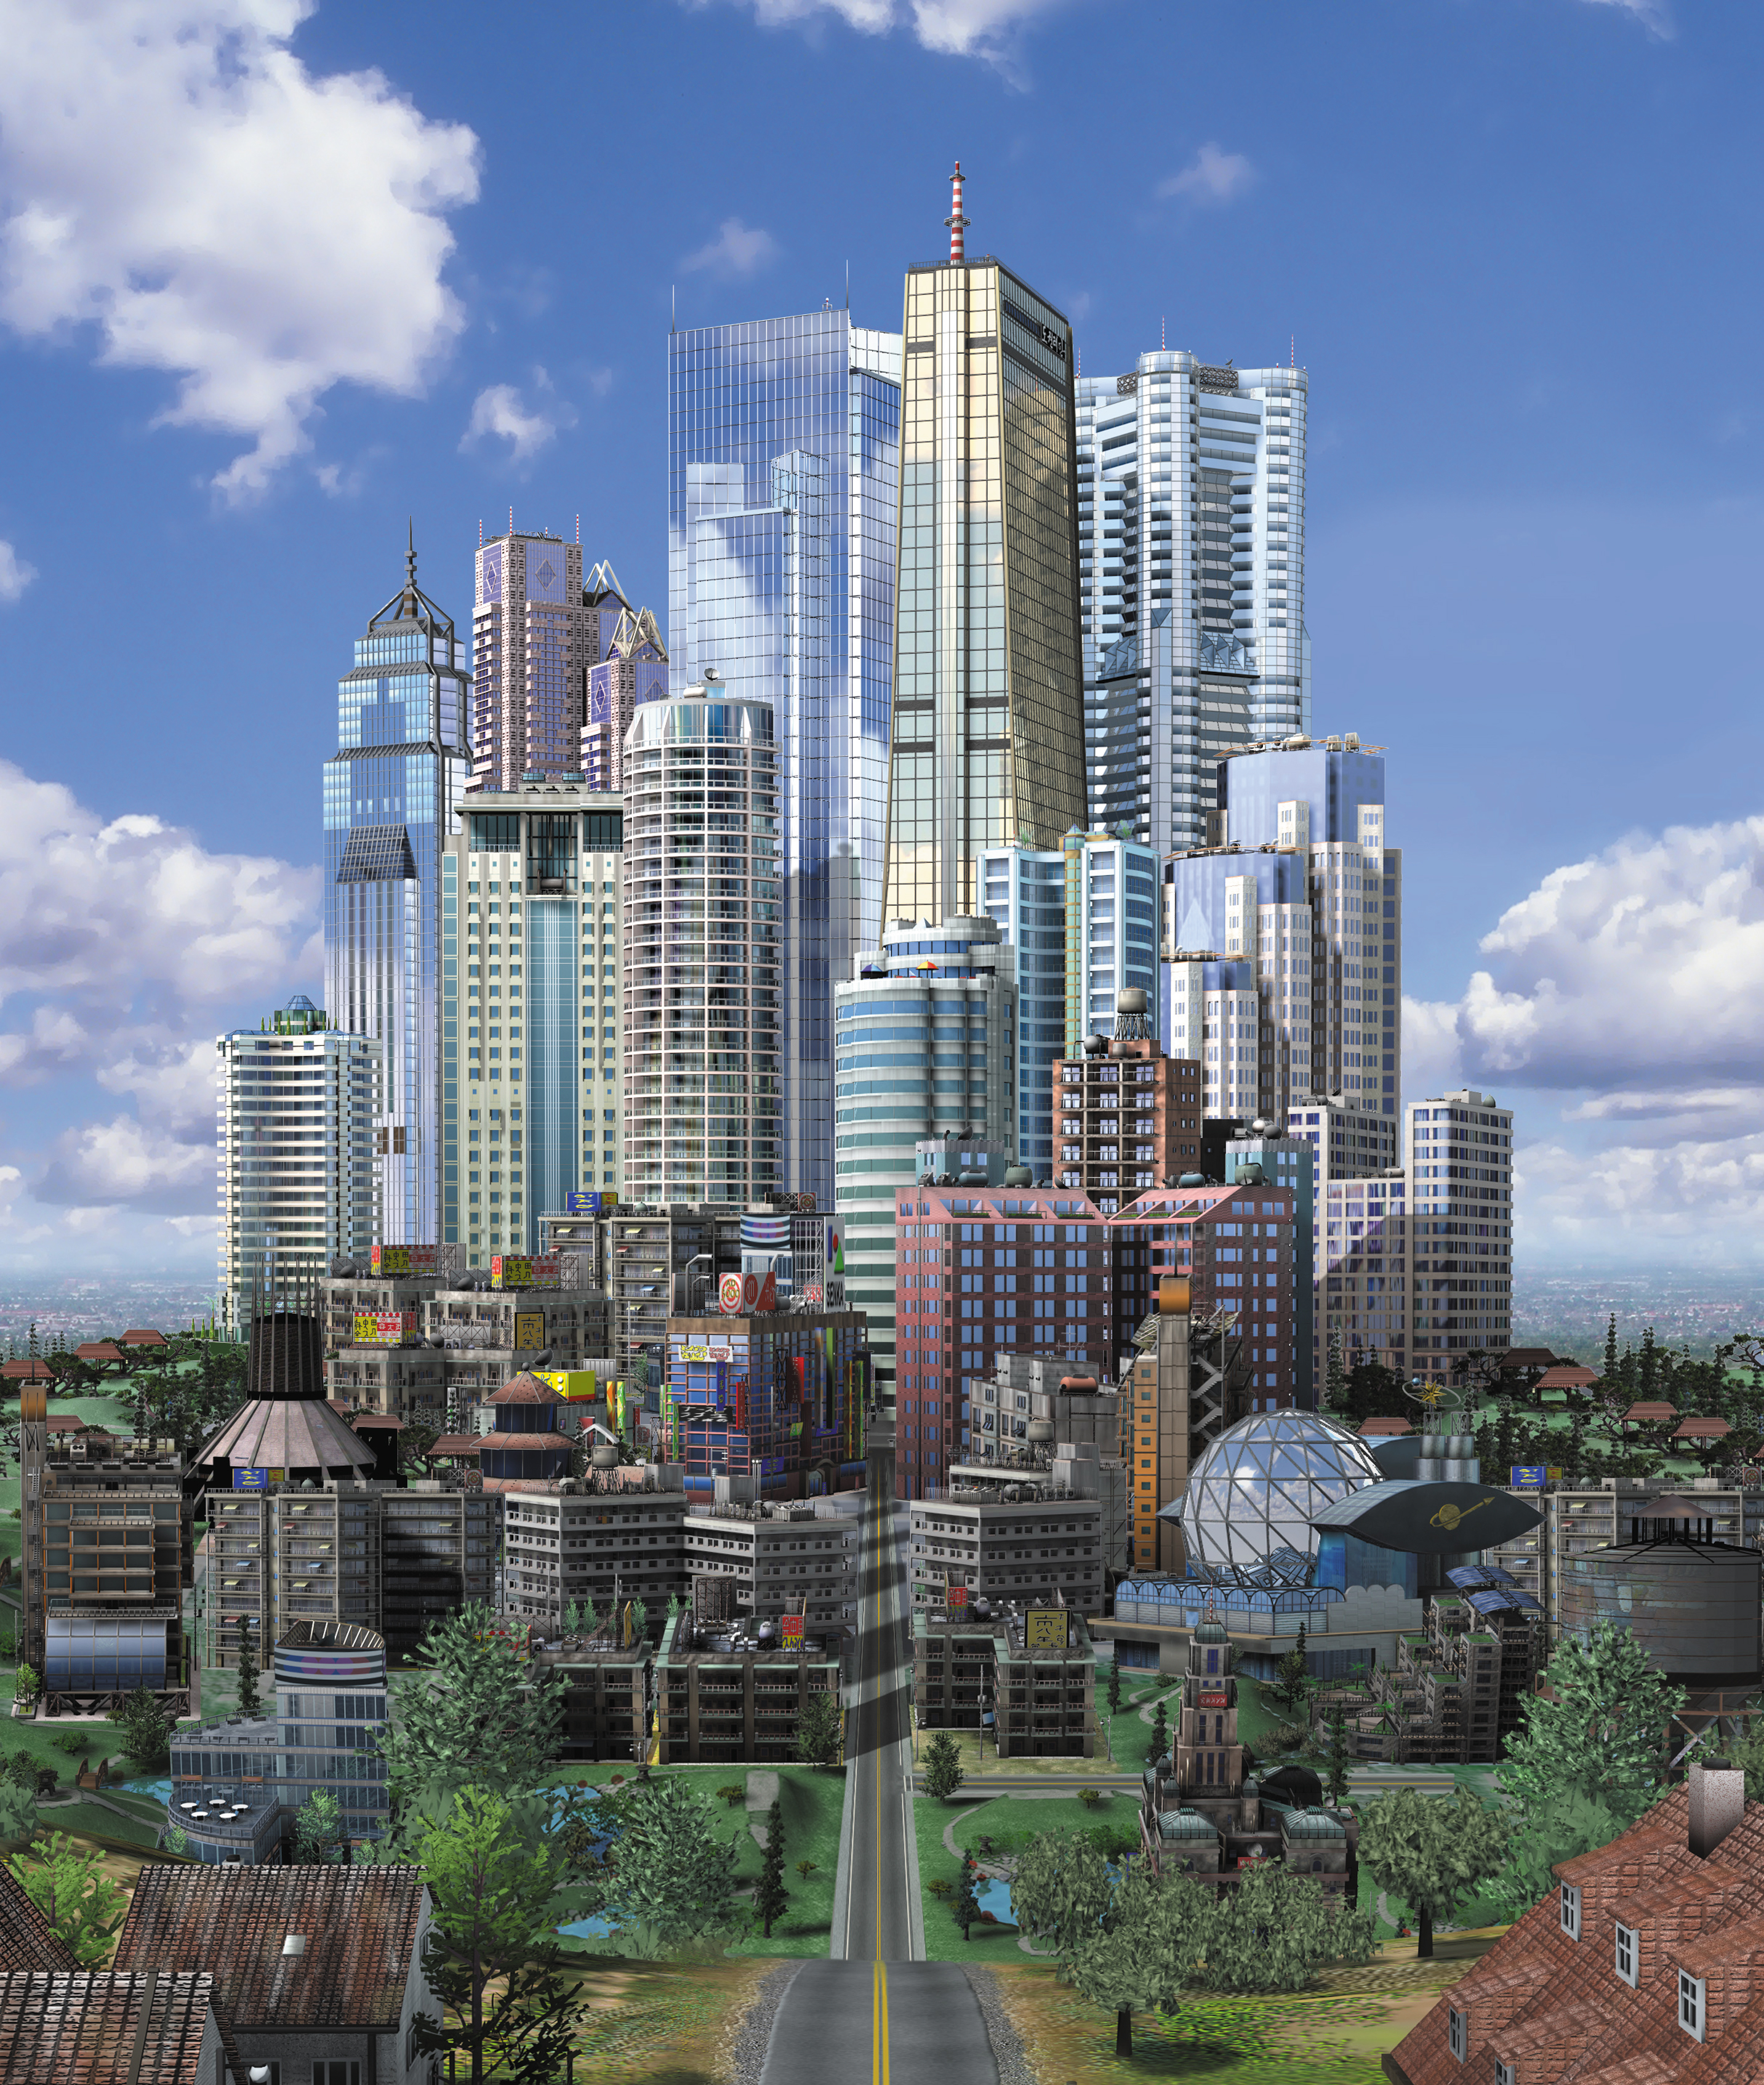 simcity 3000 download full version